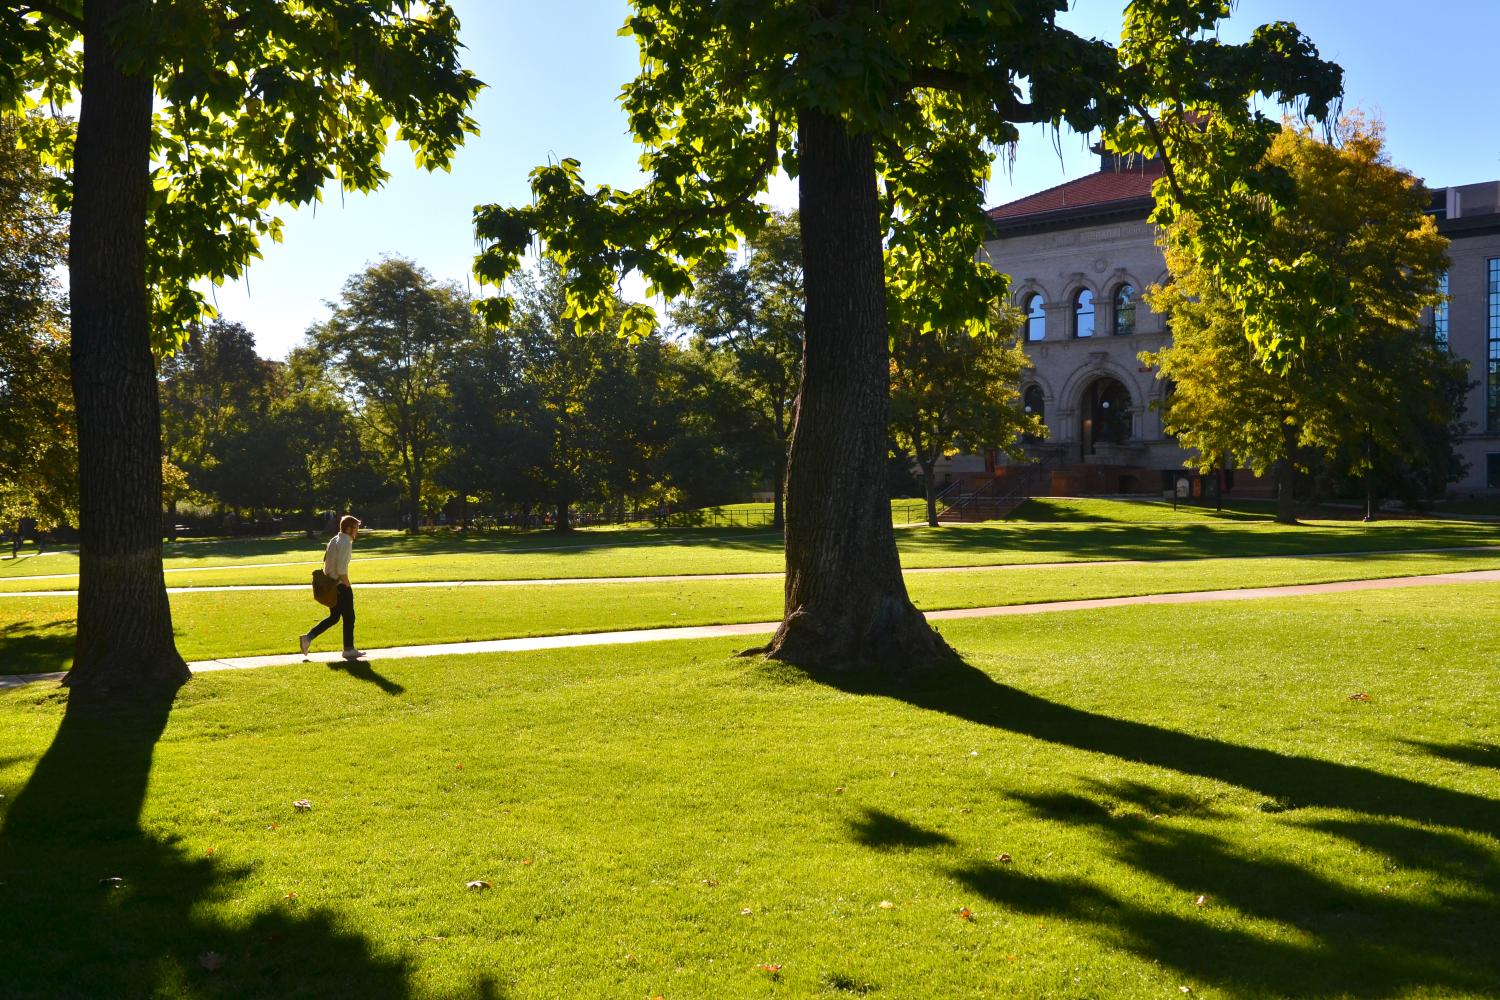 The University of Colorado Boulder has one of the most beautiful campuses in America